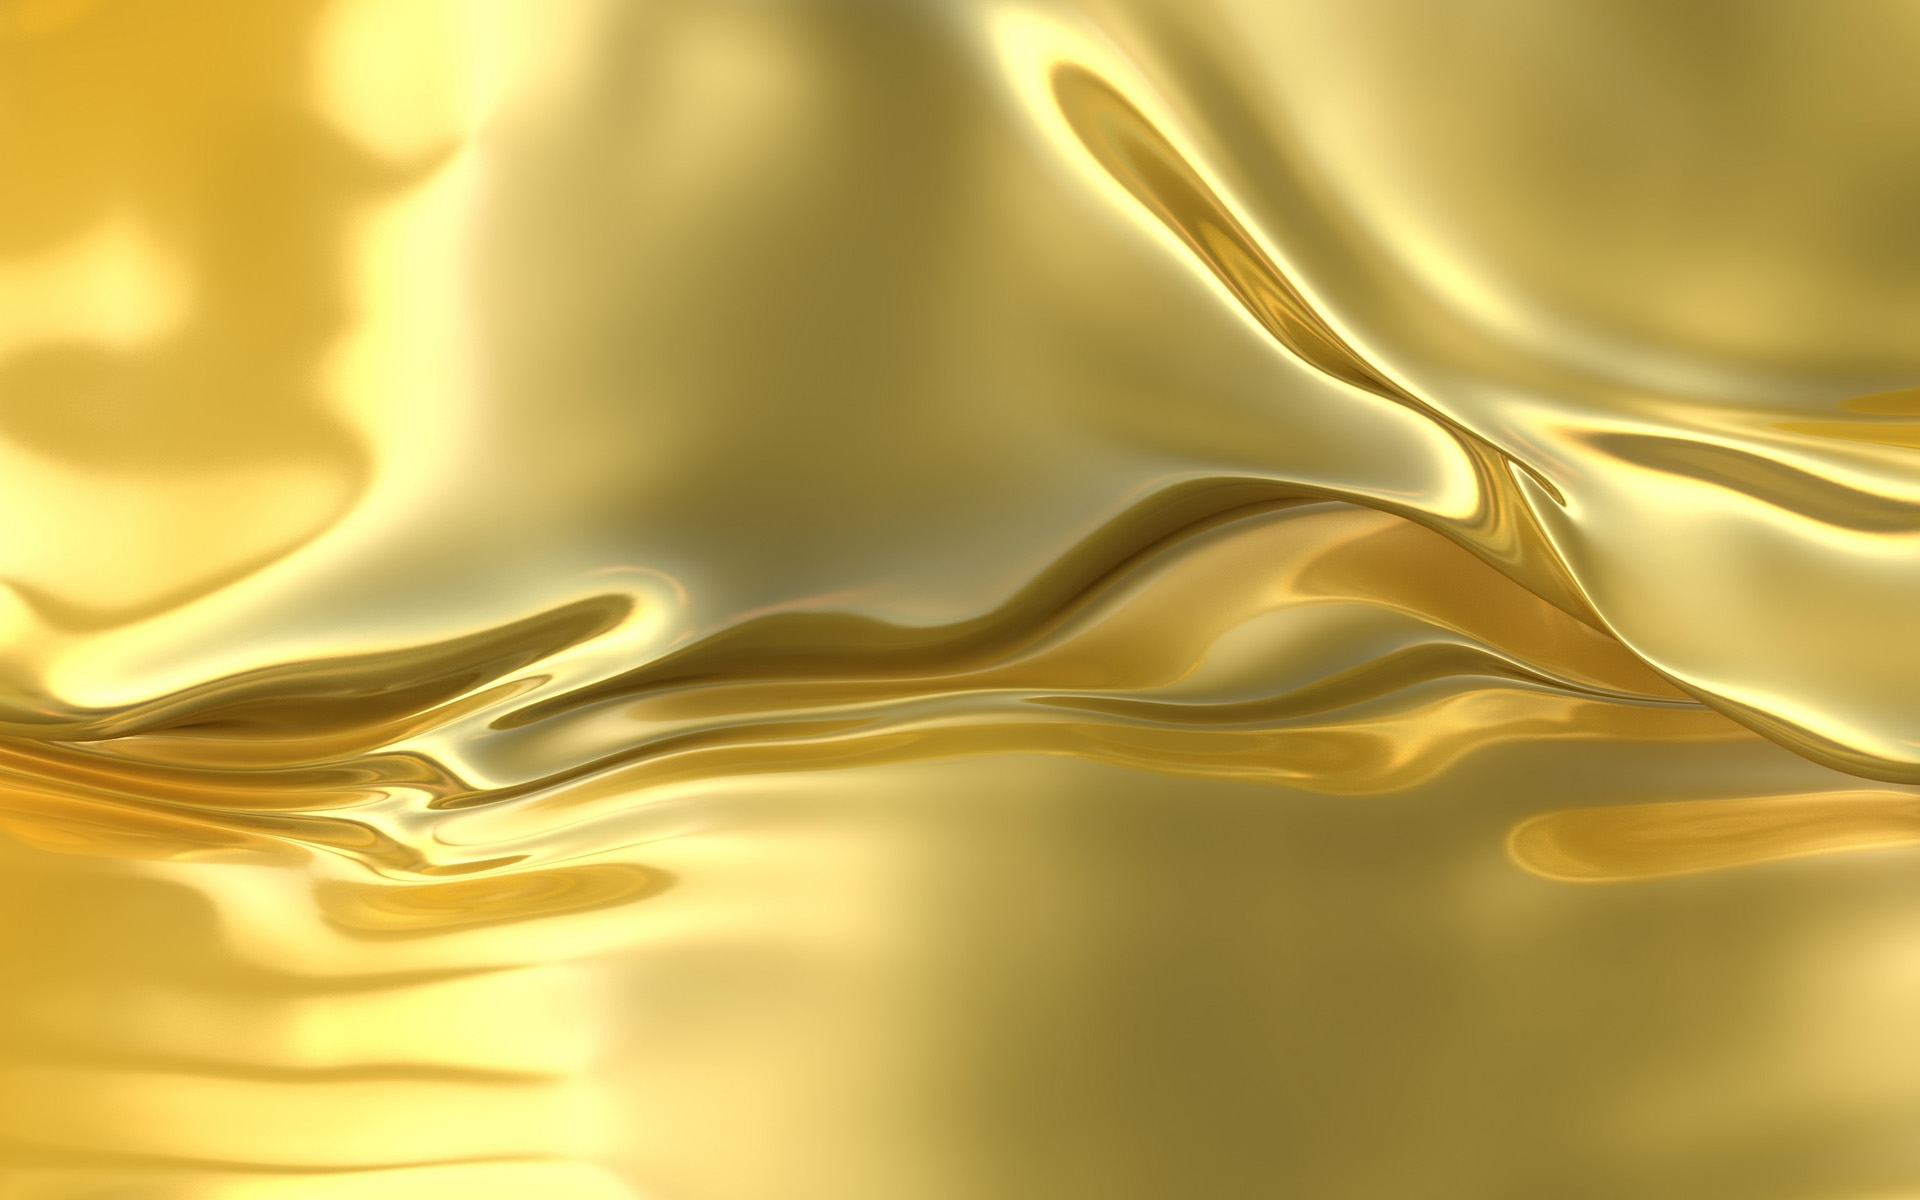 Gold plated 1080P 2K 4K 5K HD wallpapers free download  Wallpaper Flare